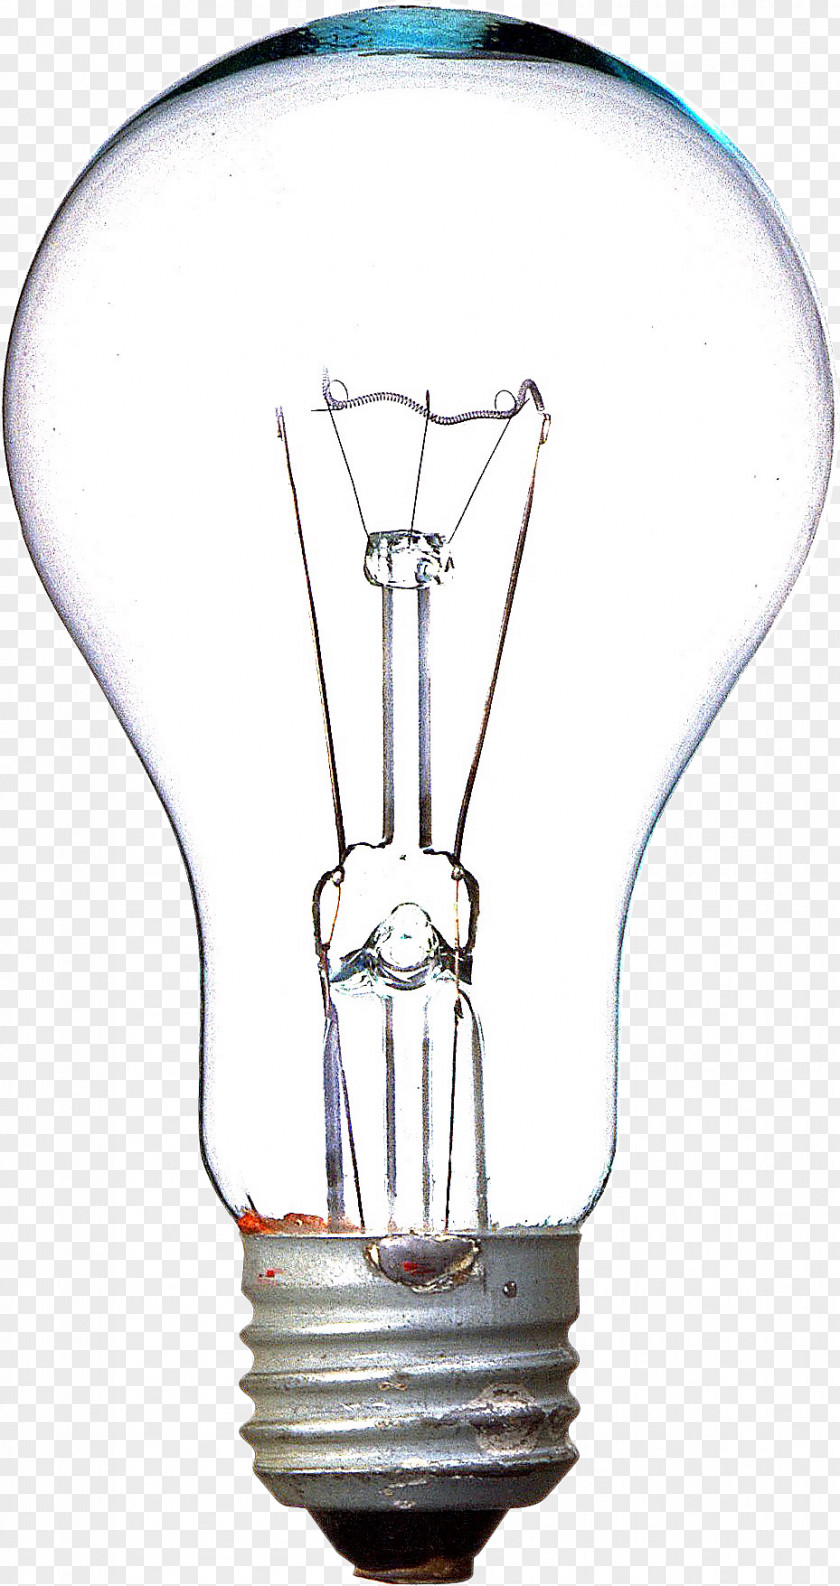 Lamp Image Incandescent Light Bulb Icon PNG